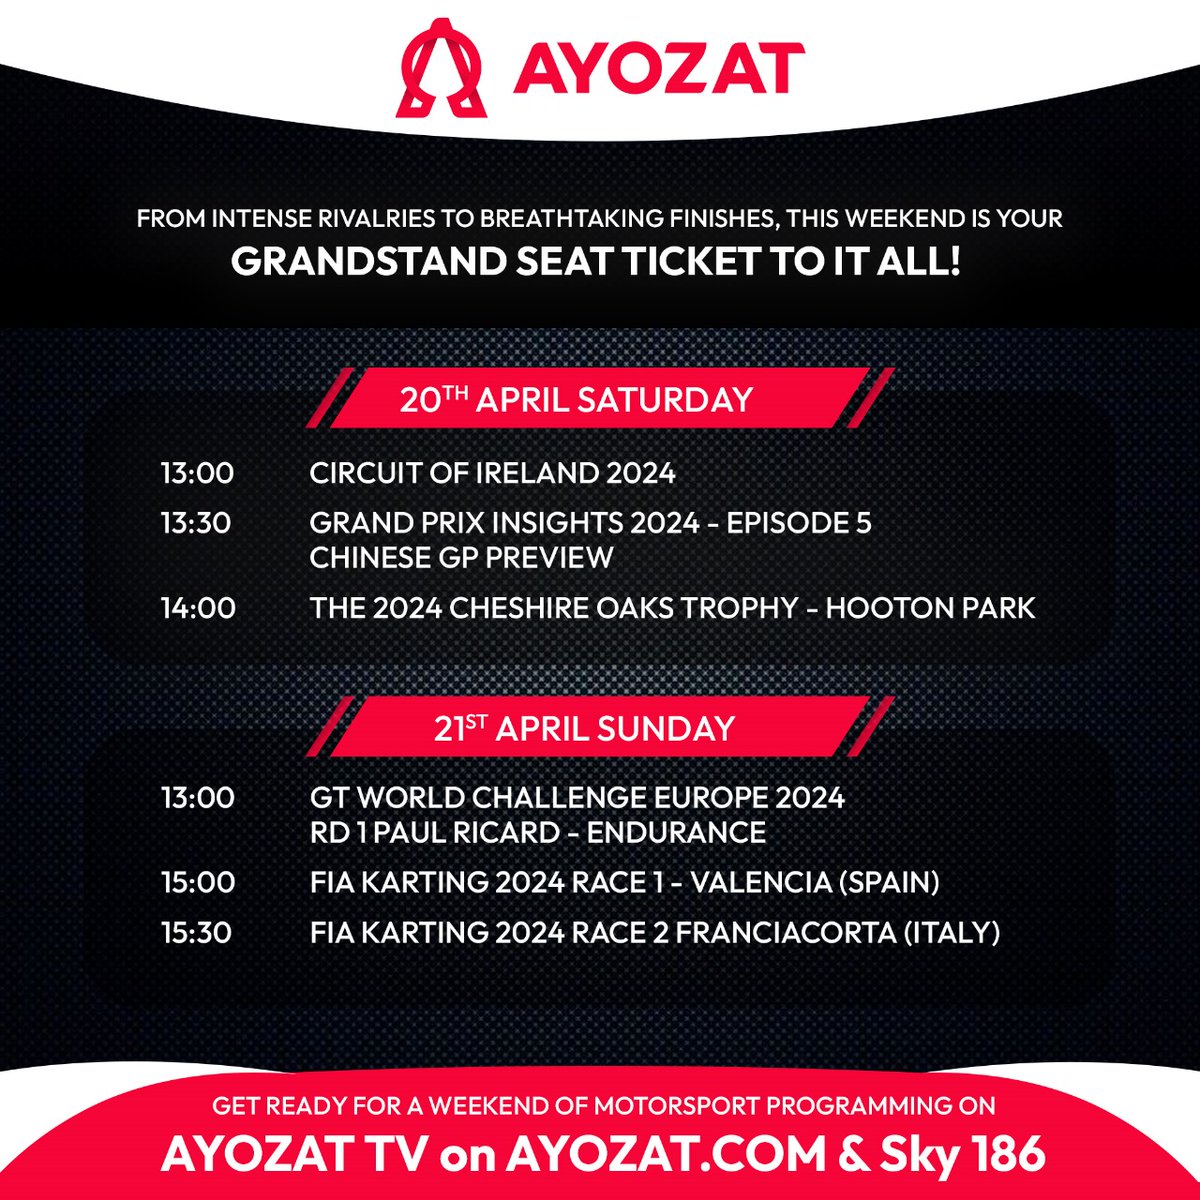 Calling all motorsport enthusiasts! Get ready for an adrenaline-fueled weekend from 1pm on Ayozat TV at Sky 186 and  ayozat.com. Don't miss a minute of action-packed races and nail-biting moments on the track!
#motorsport #cars #racing #action #weekendracing